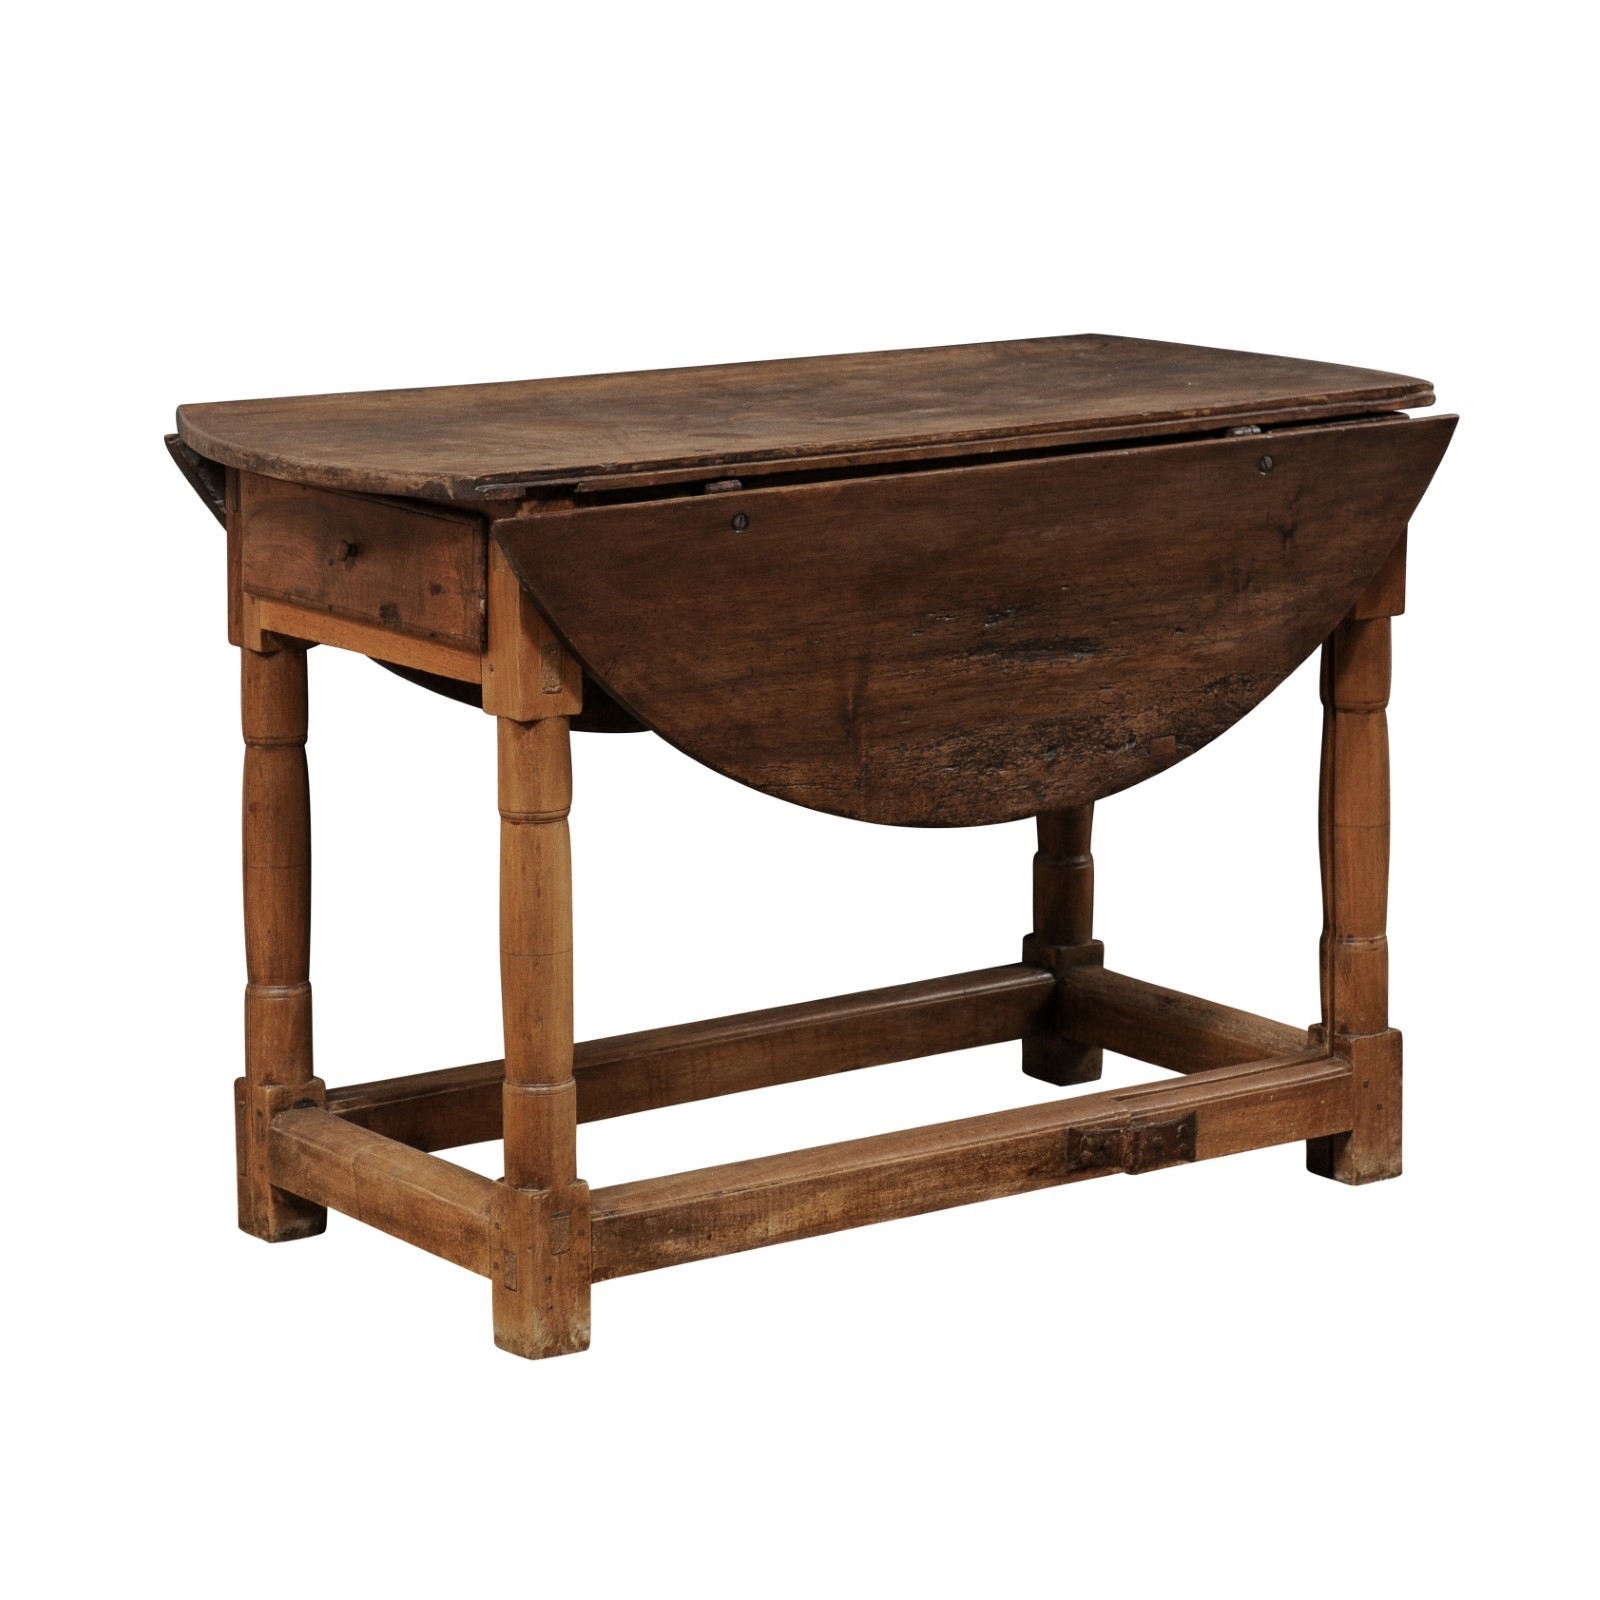 Turn of 18th & 19th c Gate-leg Table, Italy